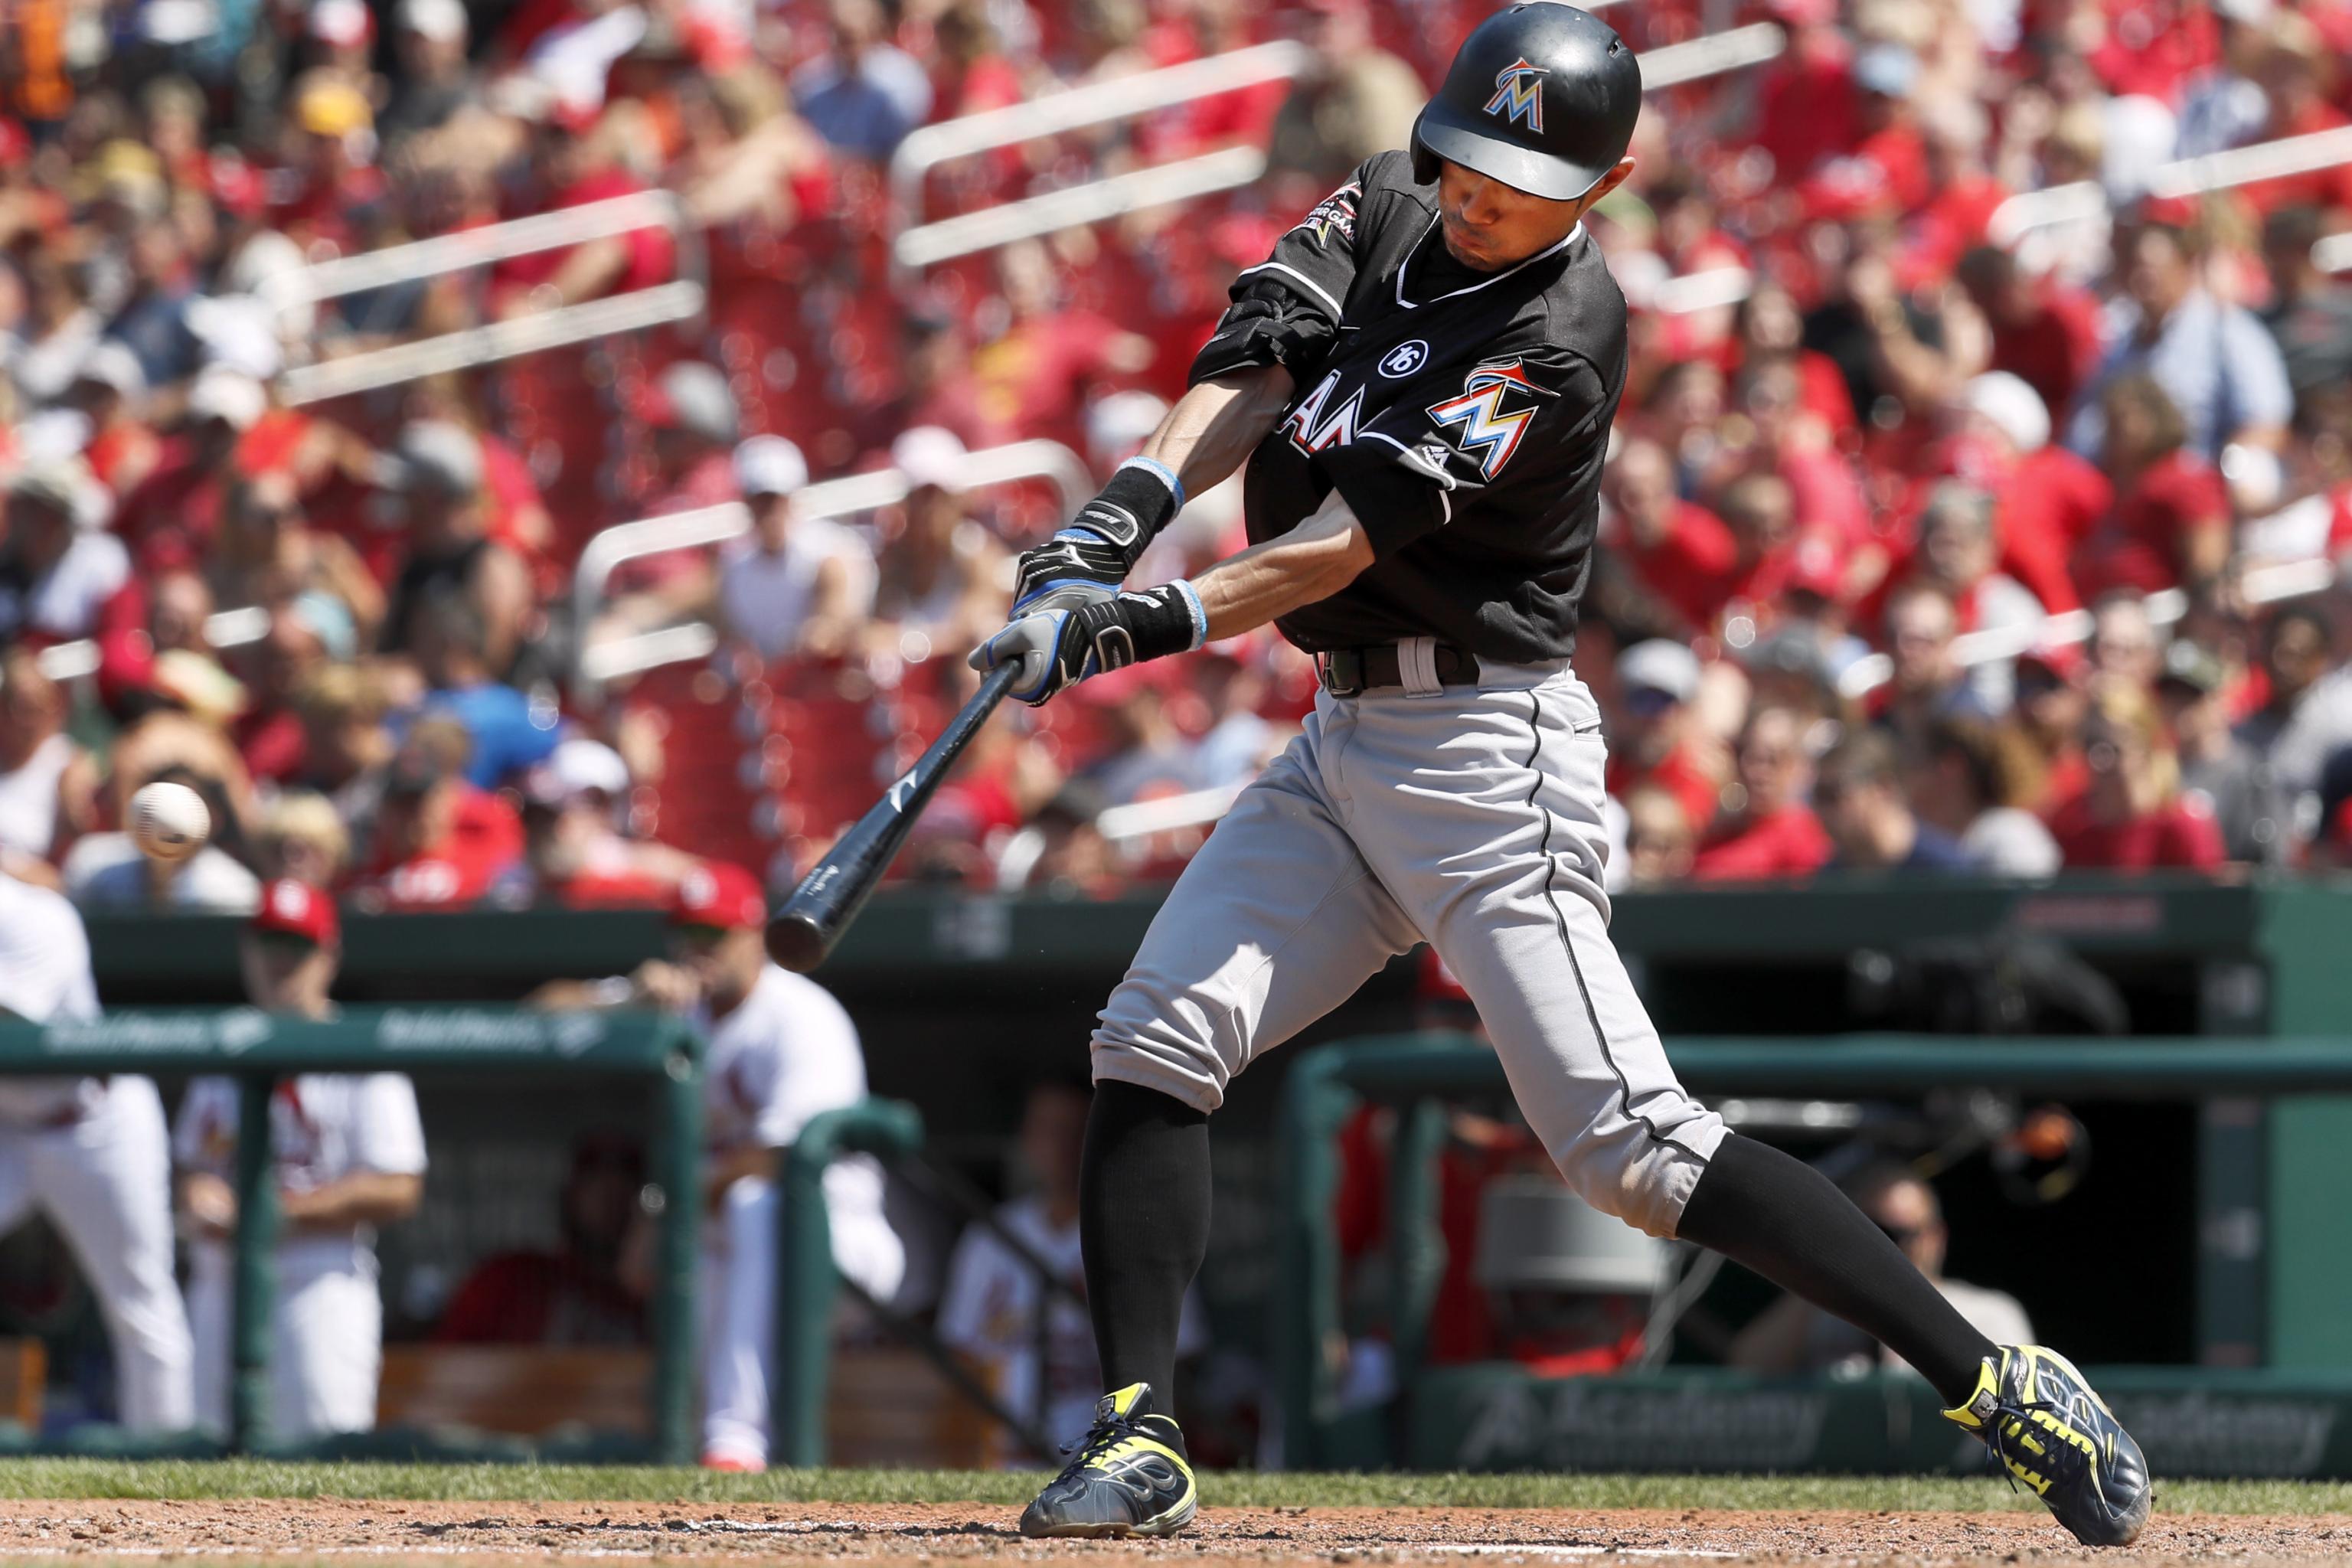 At 43, Ichiro Suzuki is still lashing out hits for the Miami